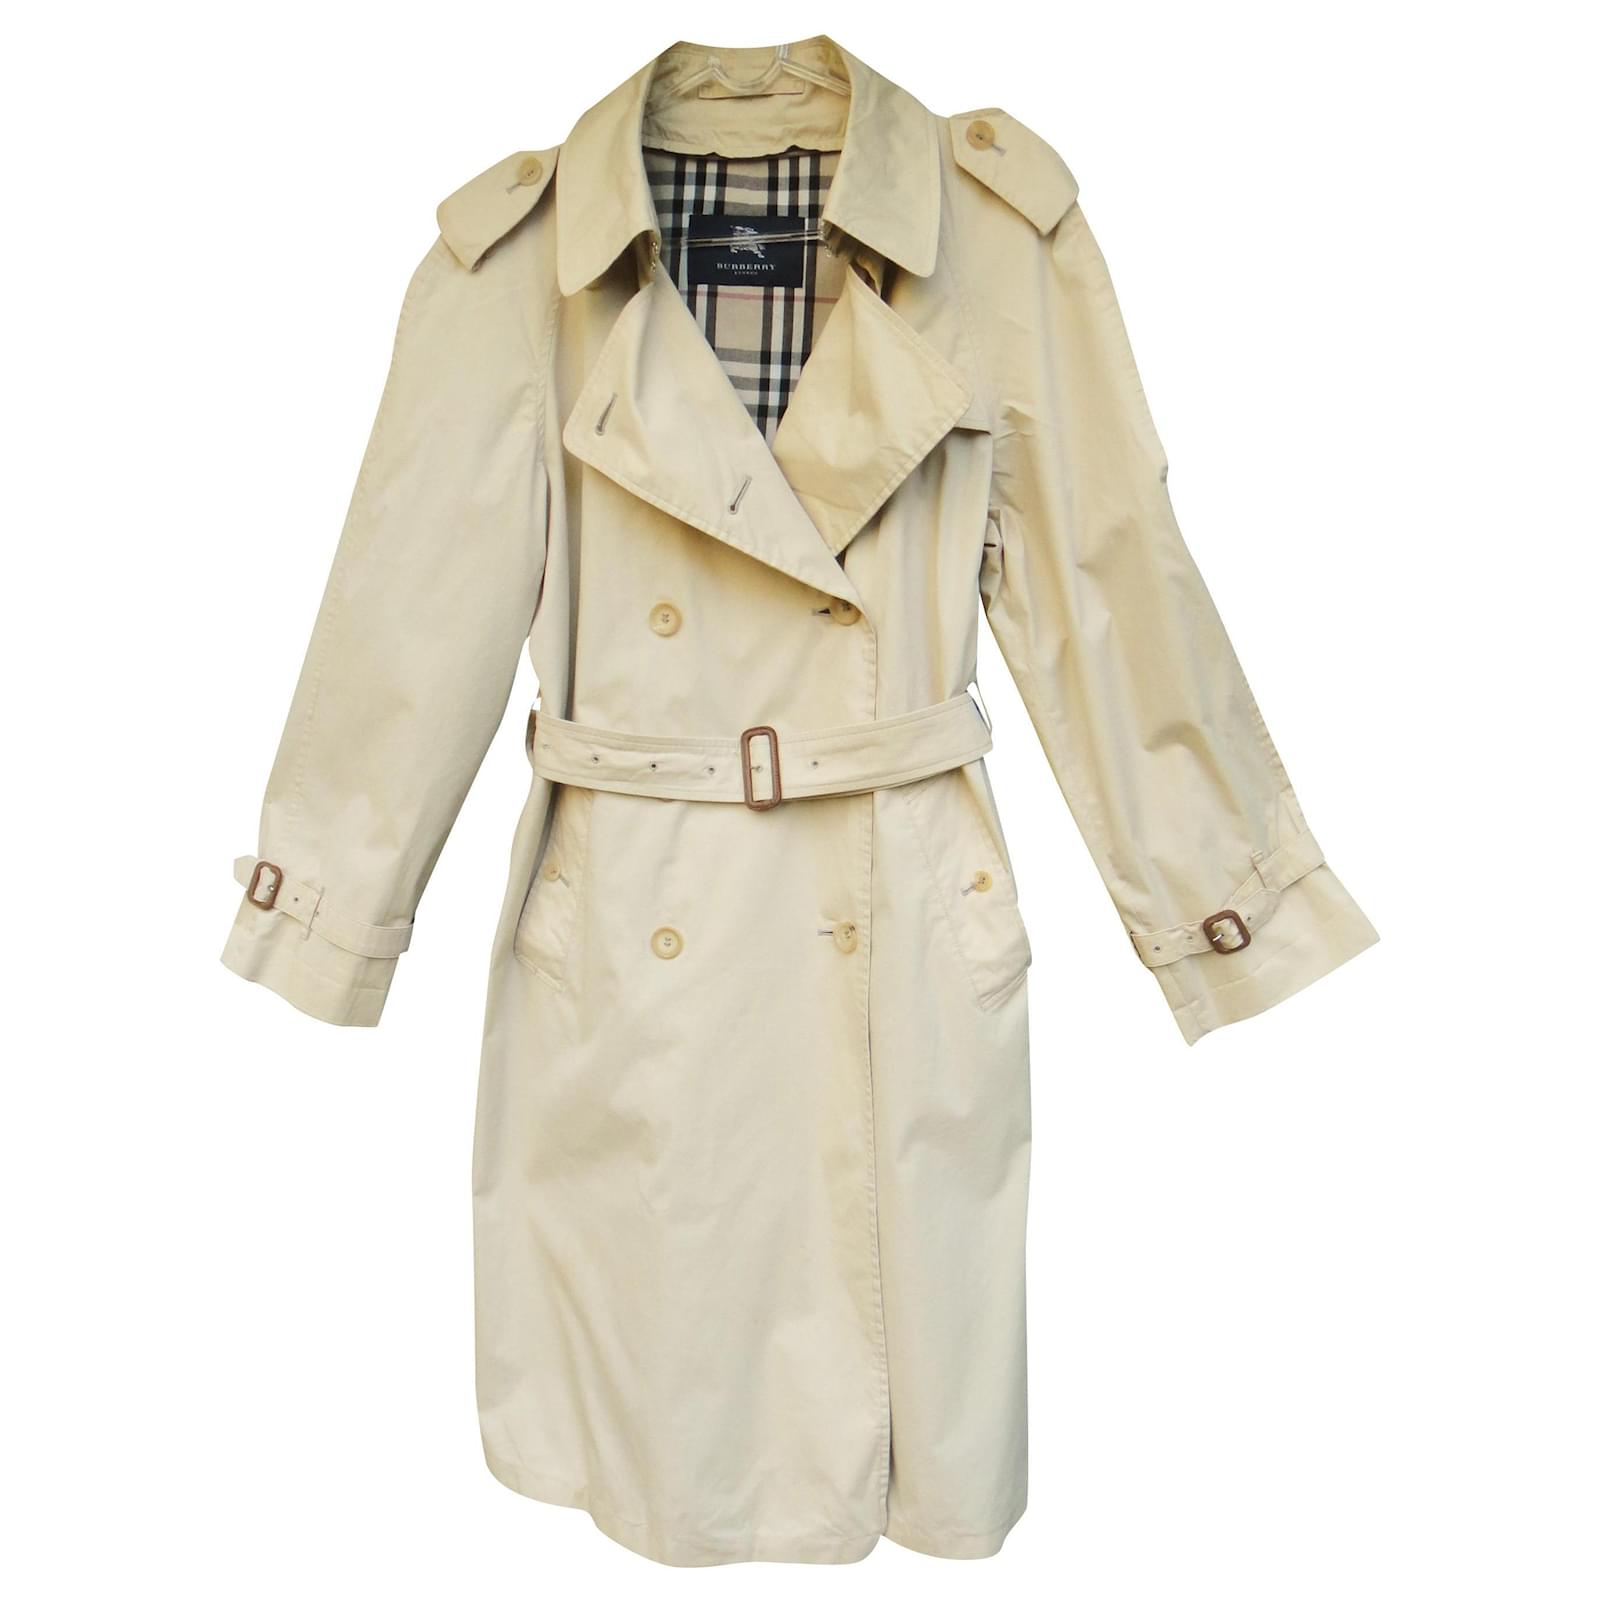 burberry trench coat removable liner